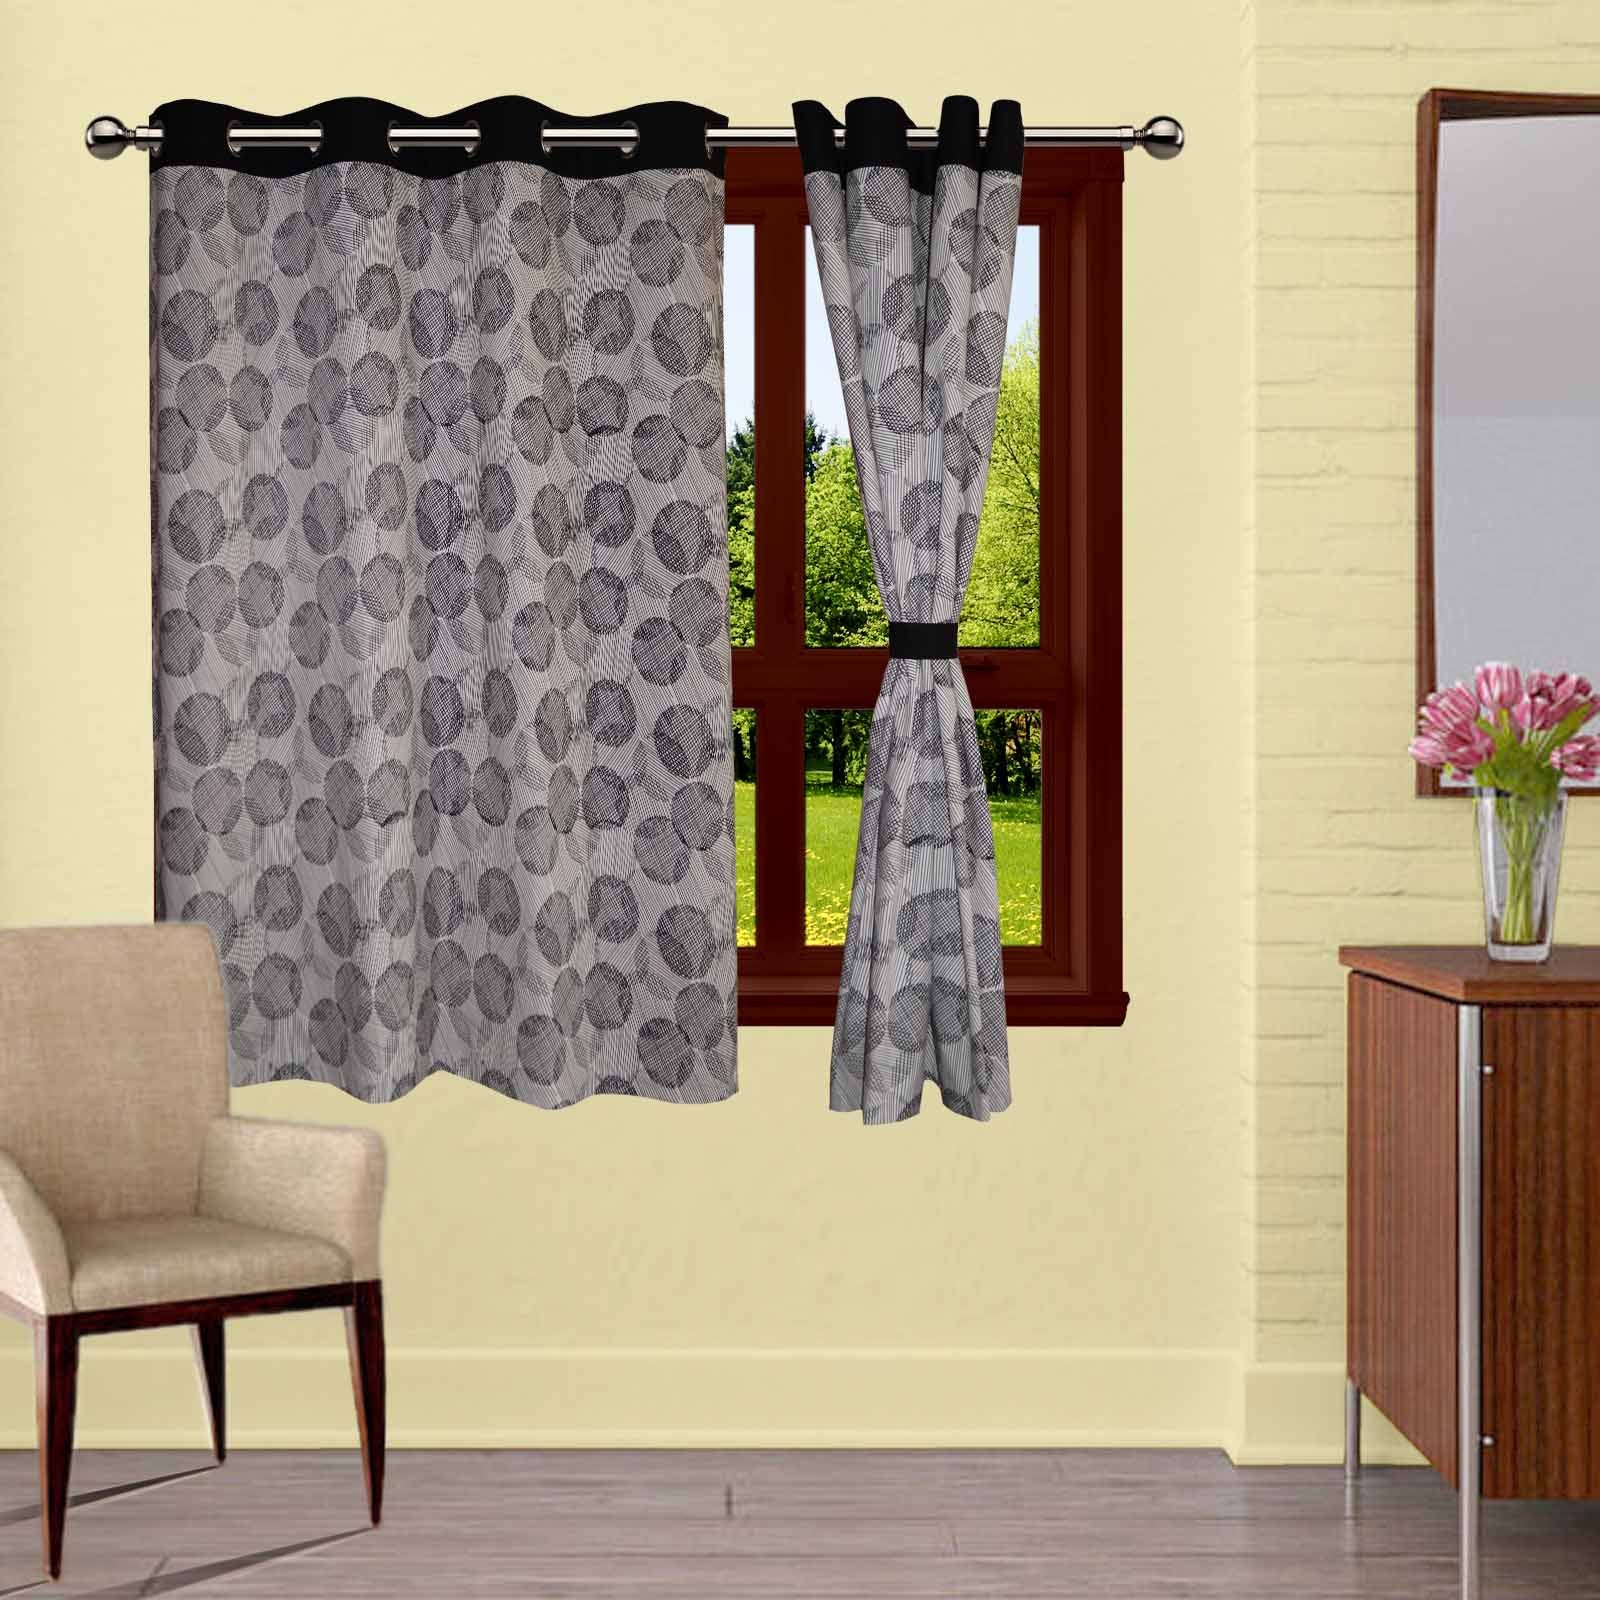 Lushomes Window Curtain, Geometric Printed Cotton Curtains for Living Room/Home with 8 Eyelets & Printed Tiebacks for Window (54x60 Inches),Pack of: 1